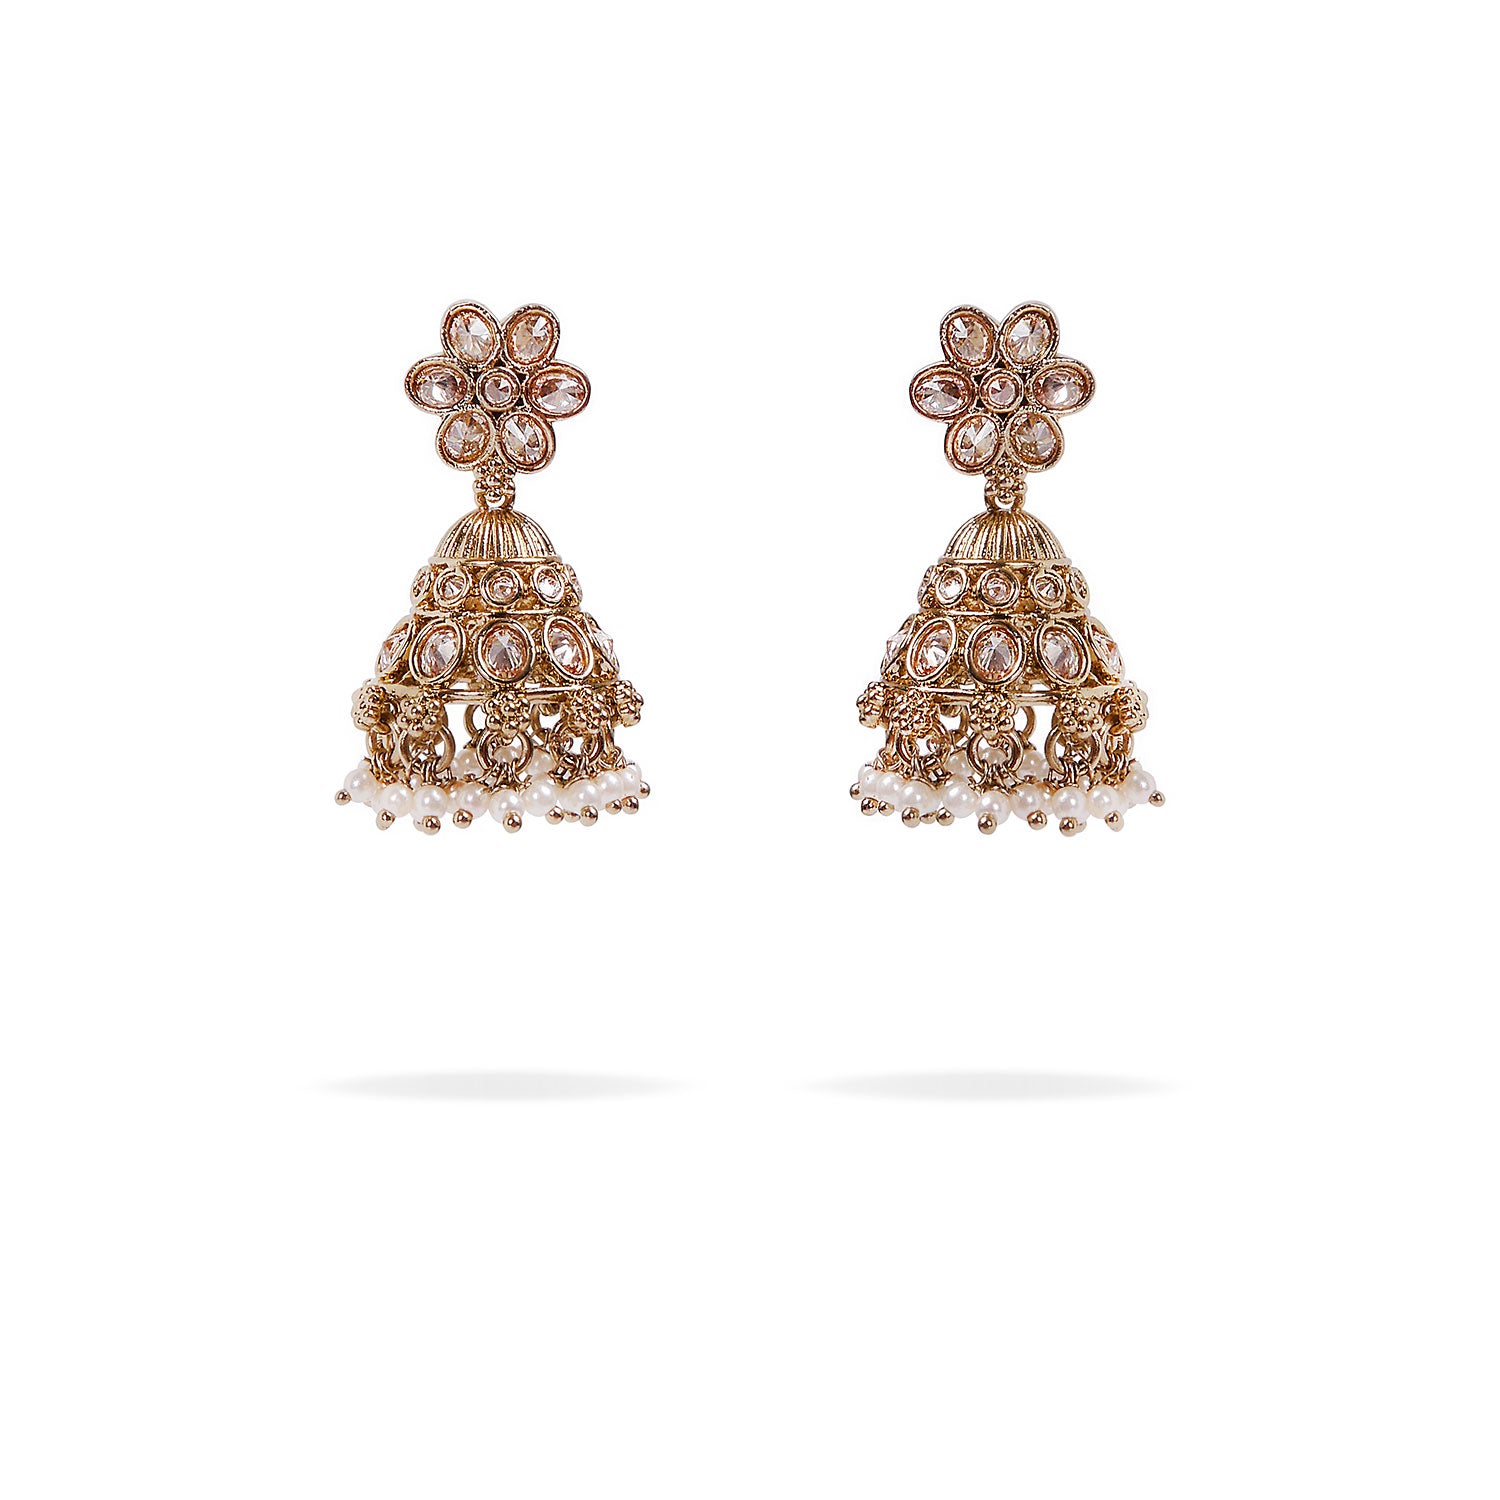 Poppy Jhumka Earrings in Pearl and Antique Gold